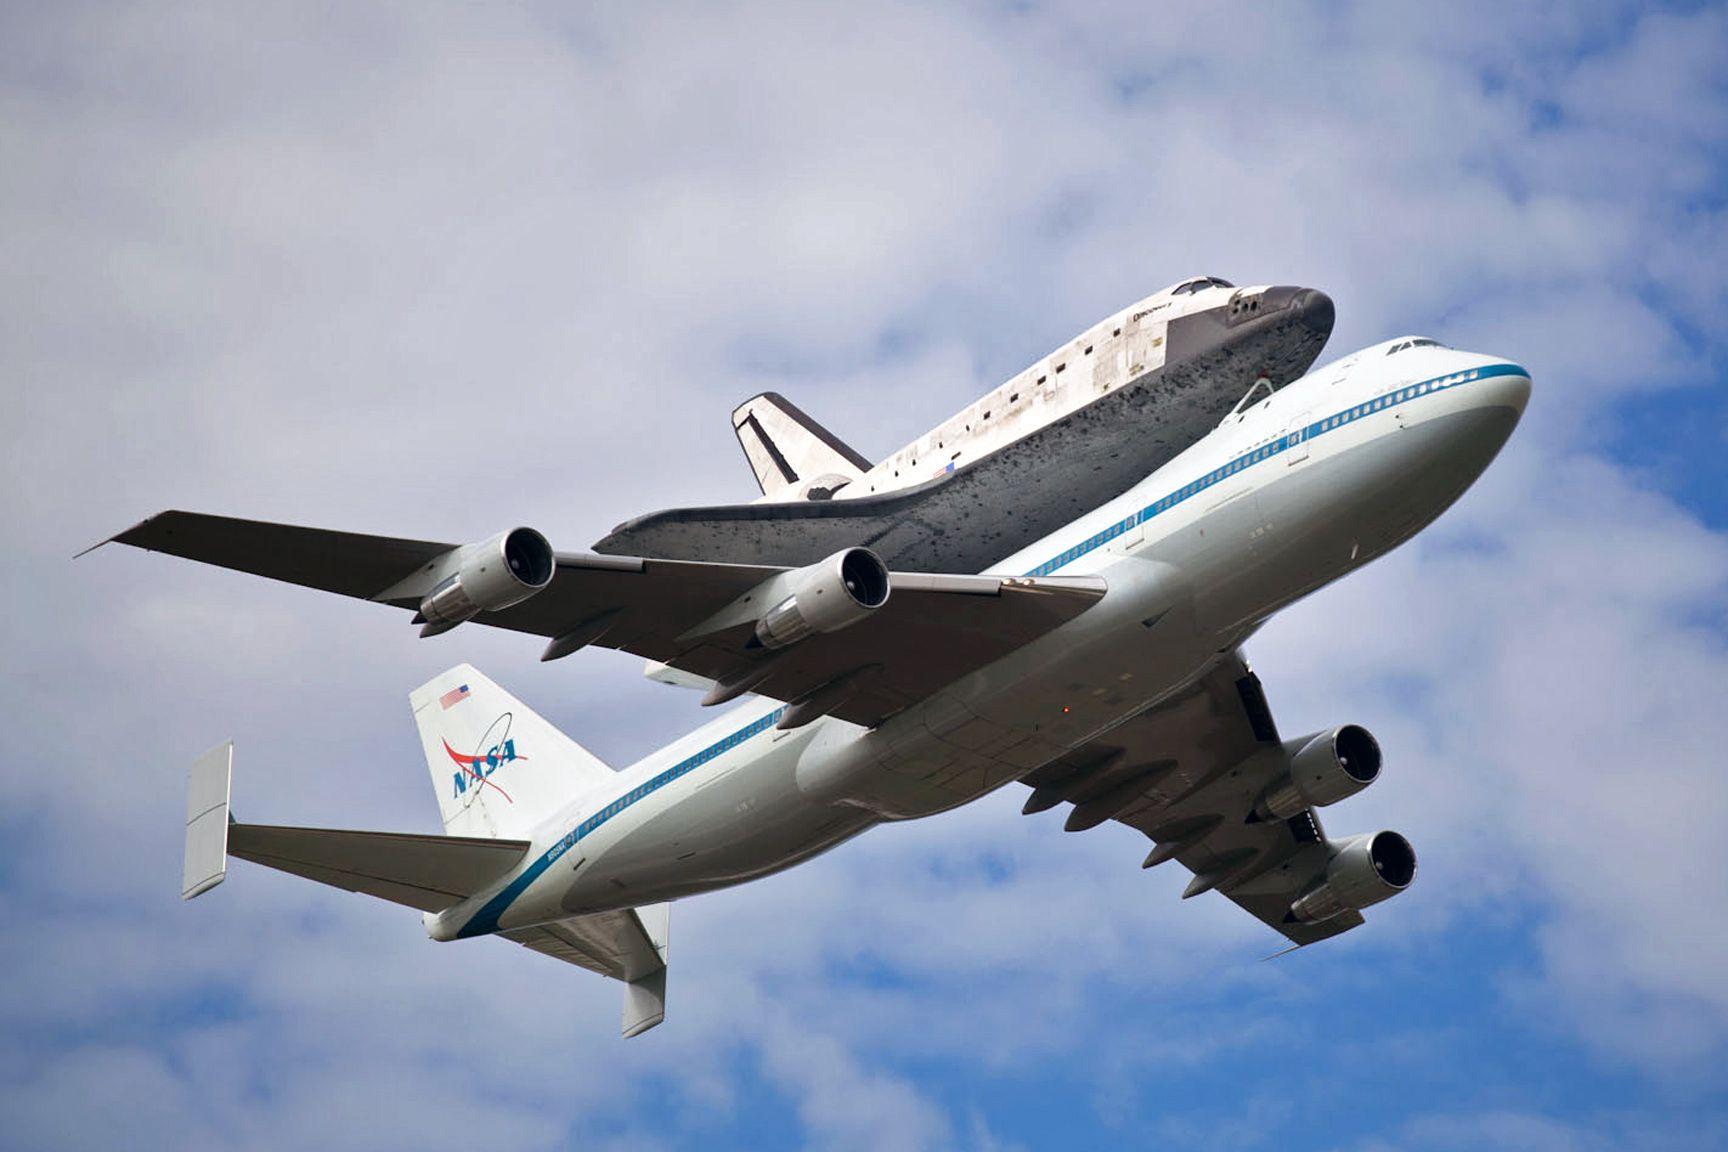 Inside the Space Shuttle Carrier Aircraft